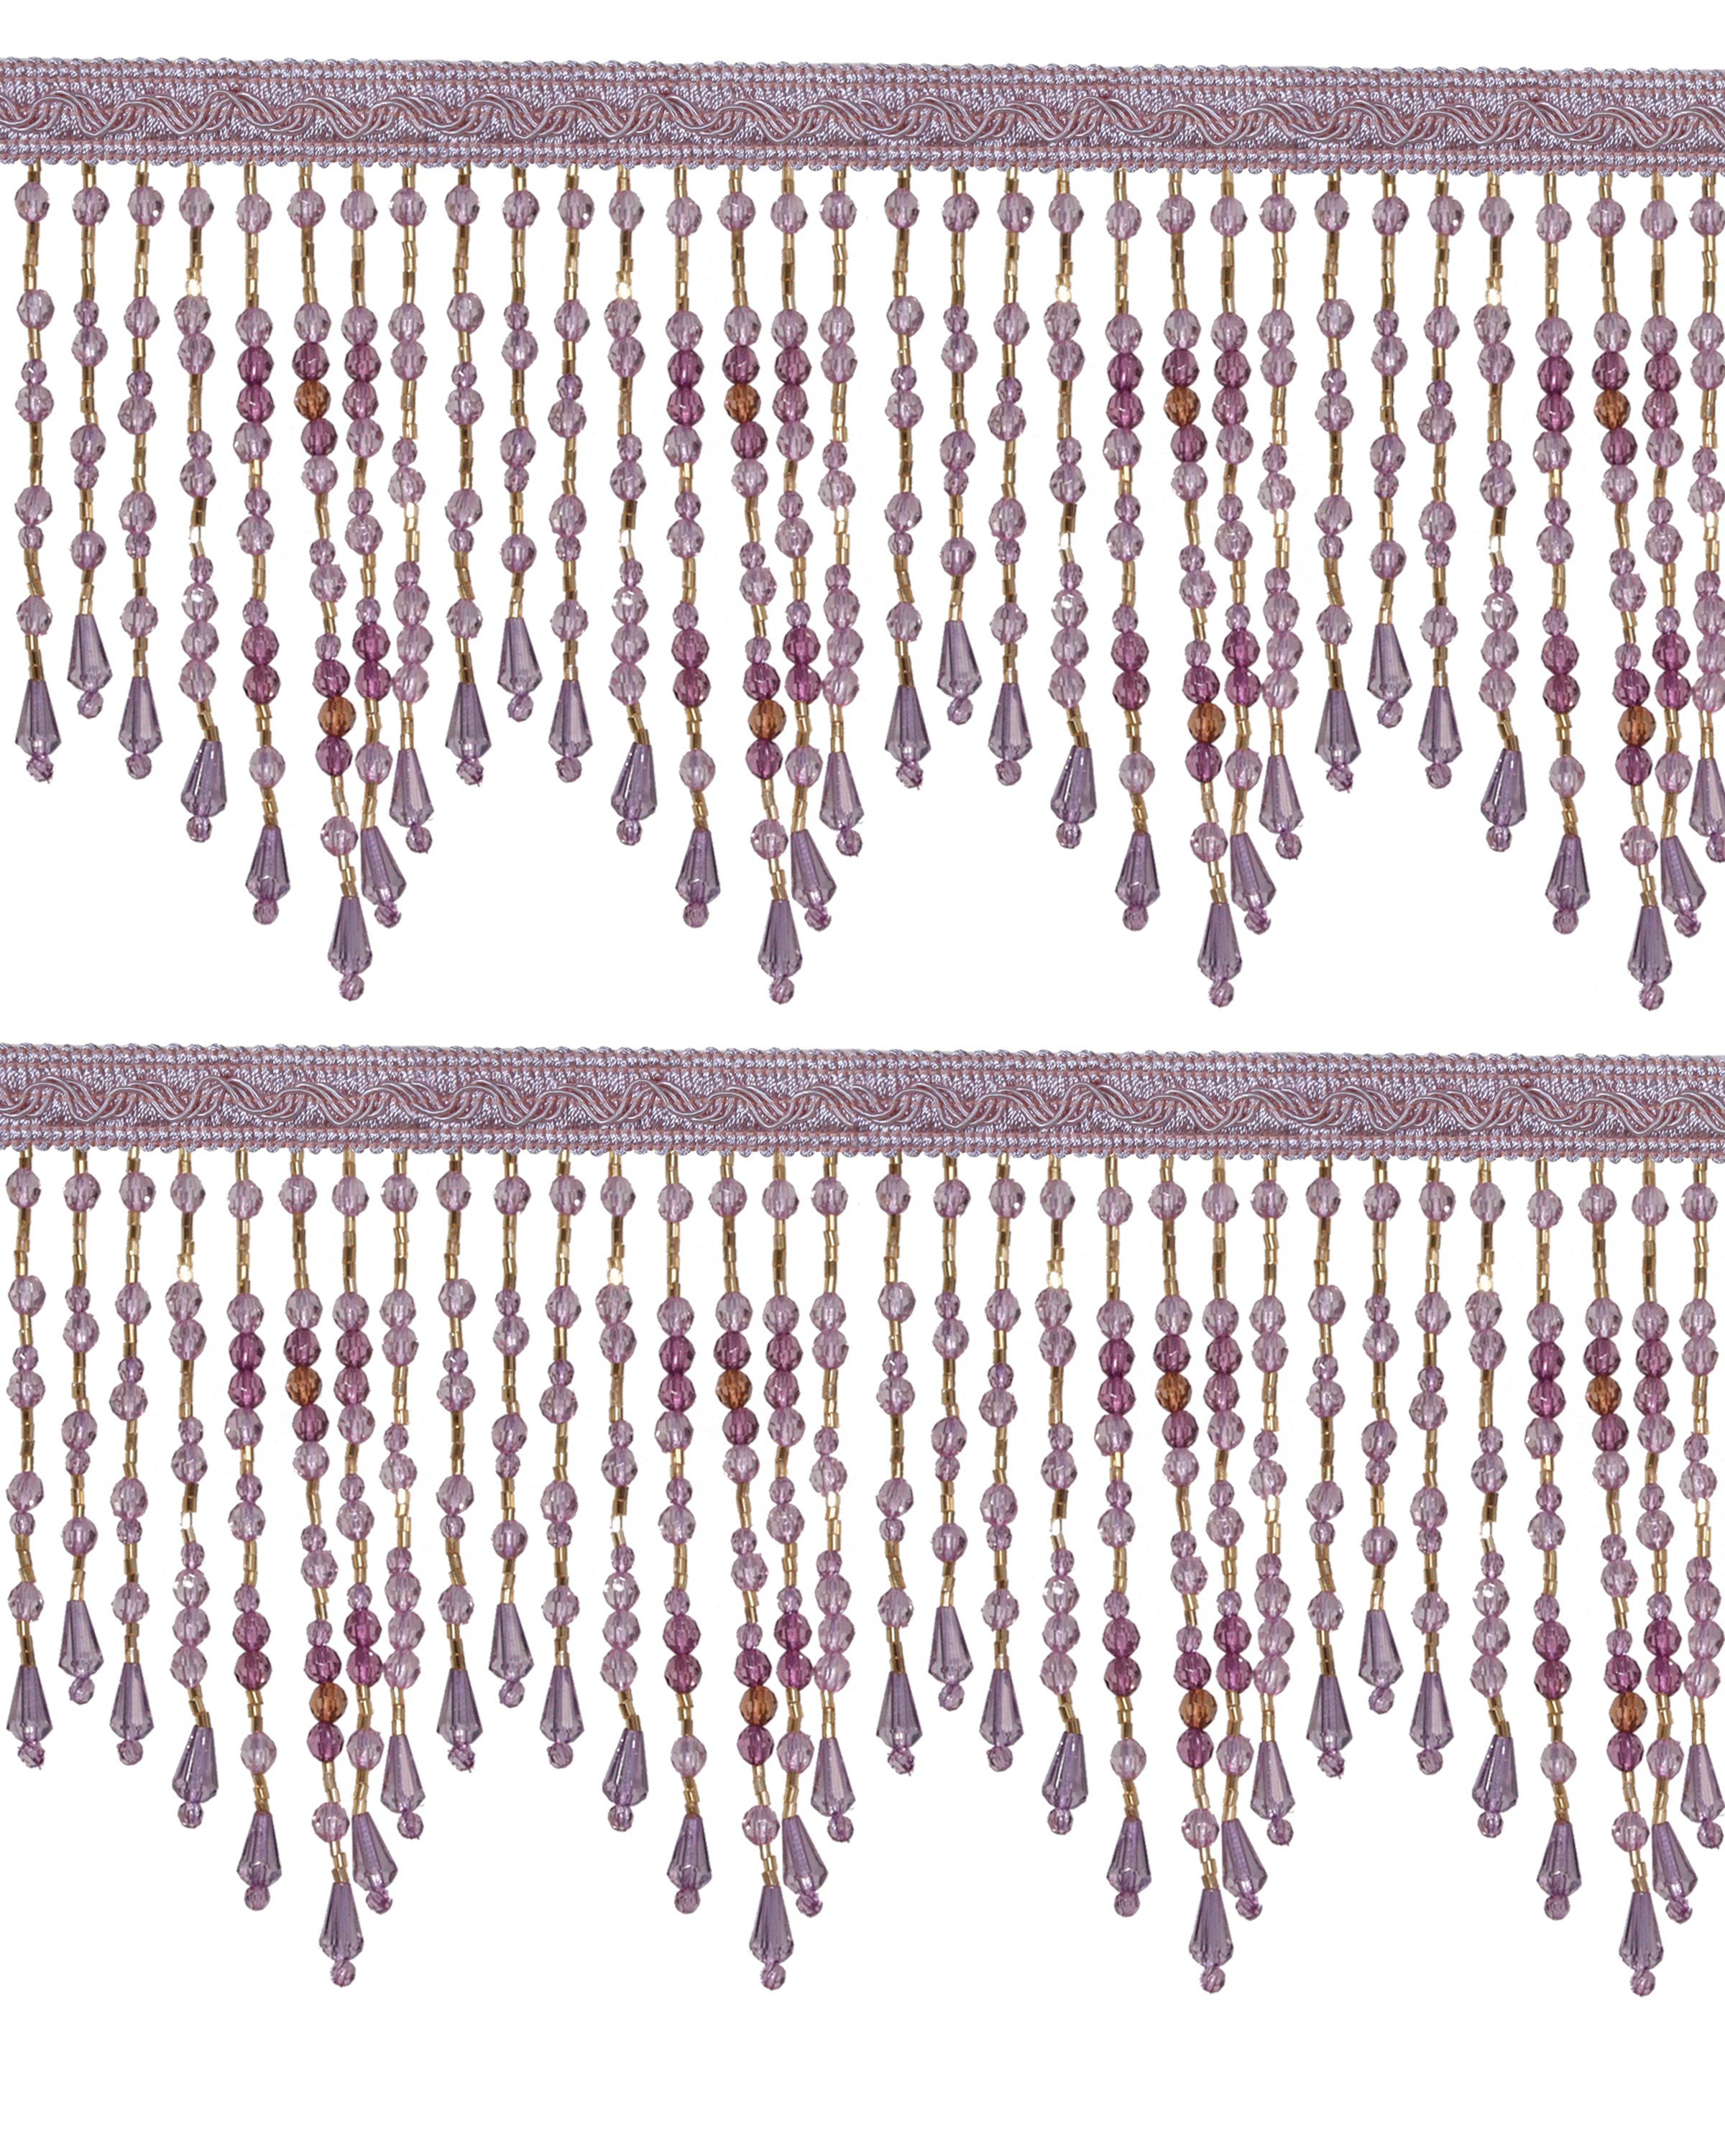 Fringe Beading - Amethyst 135mm Price is for 5 metres